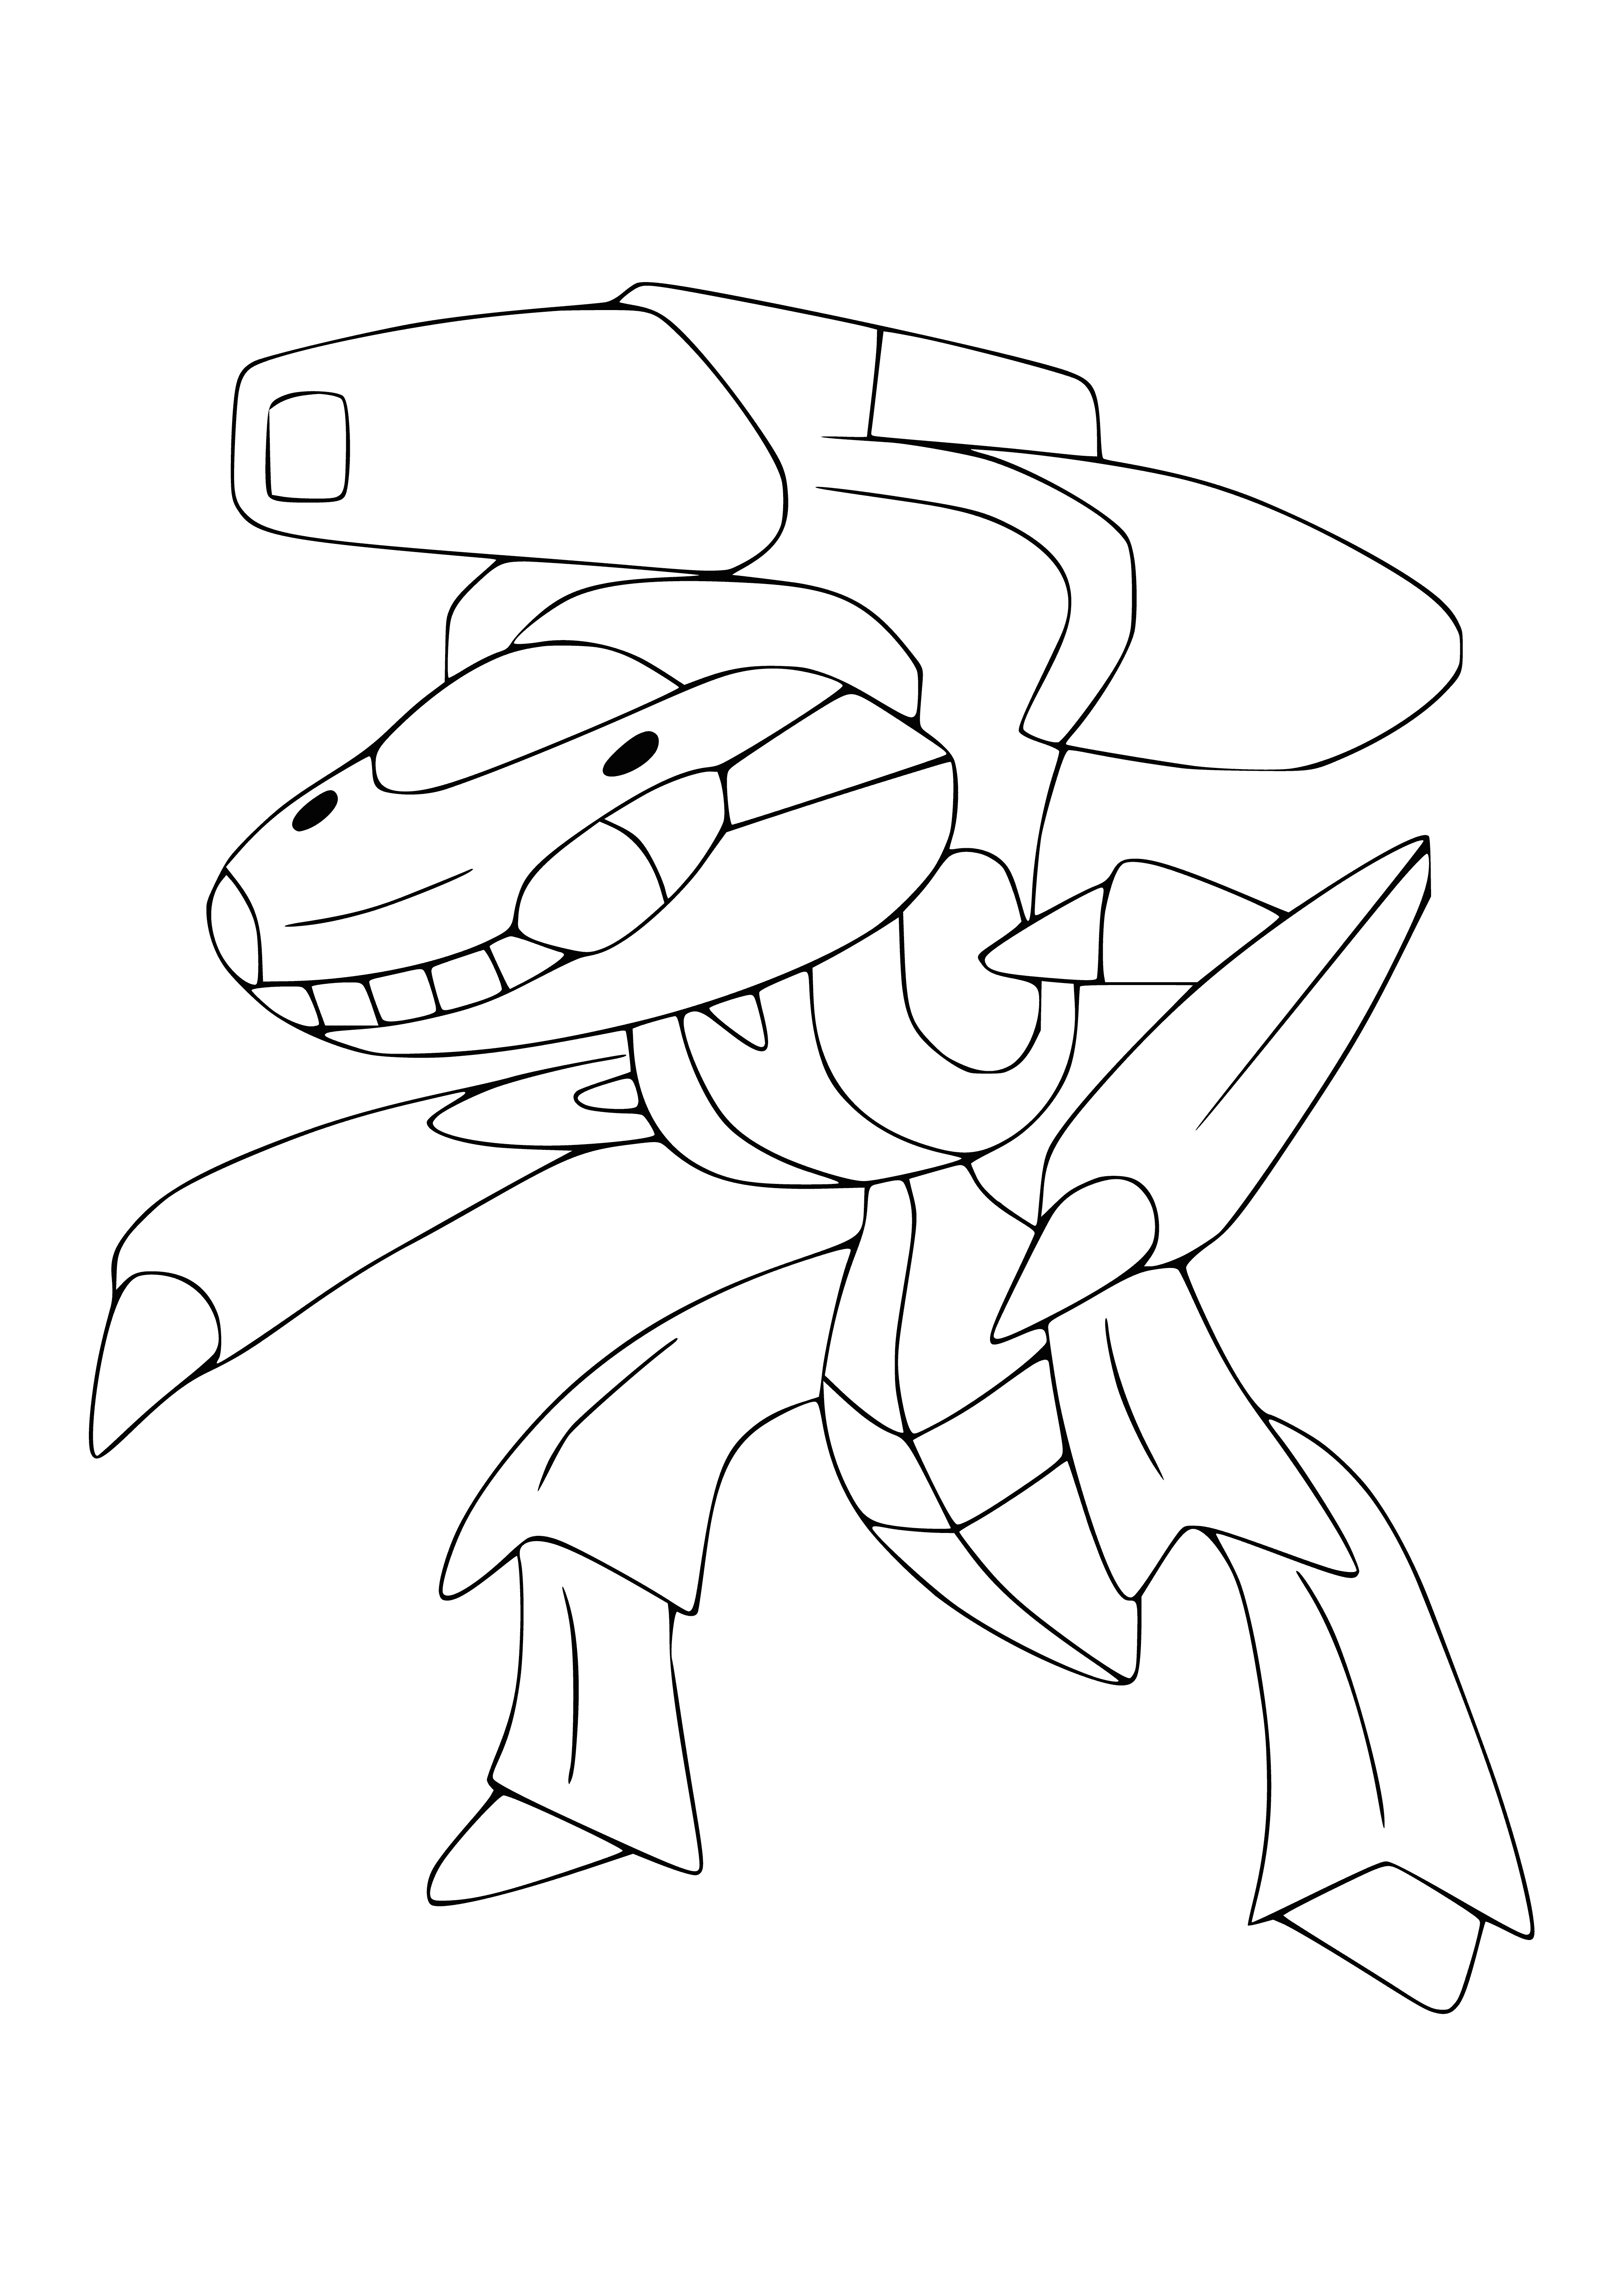 coloring page: Legendary Pokemon Genesect is a Psychic/Steel type with red carapace, blue limbs, red eyes & yellow crest. It carries a big blue cannon on its back.